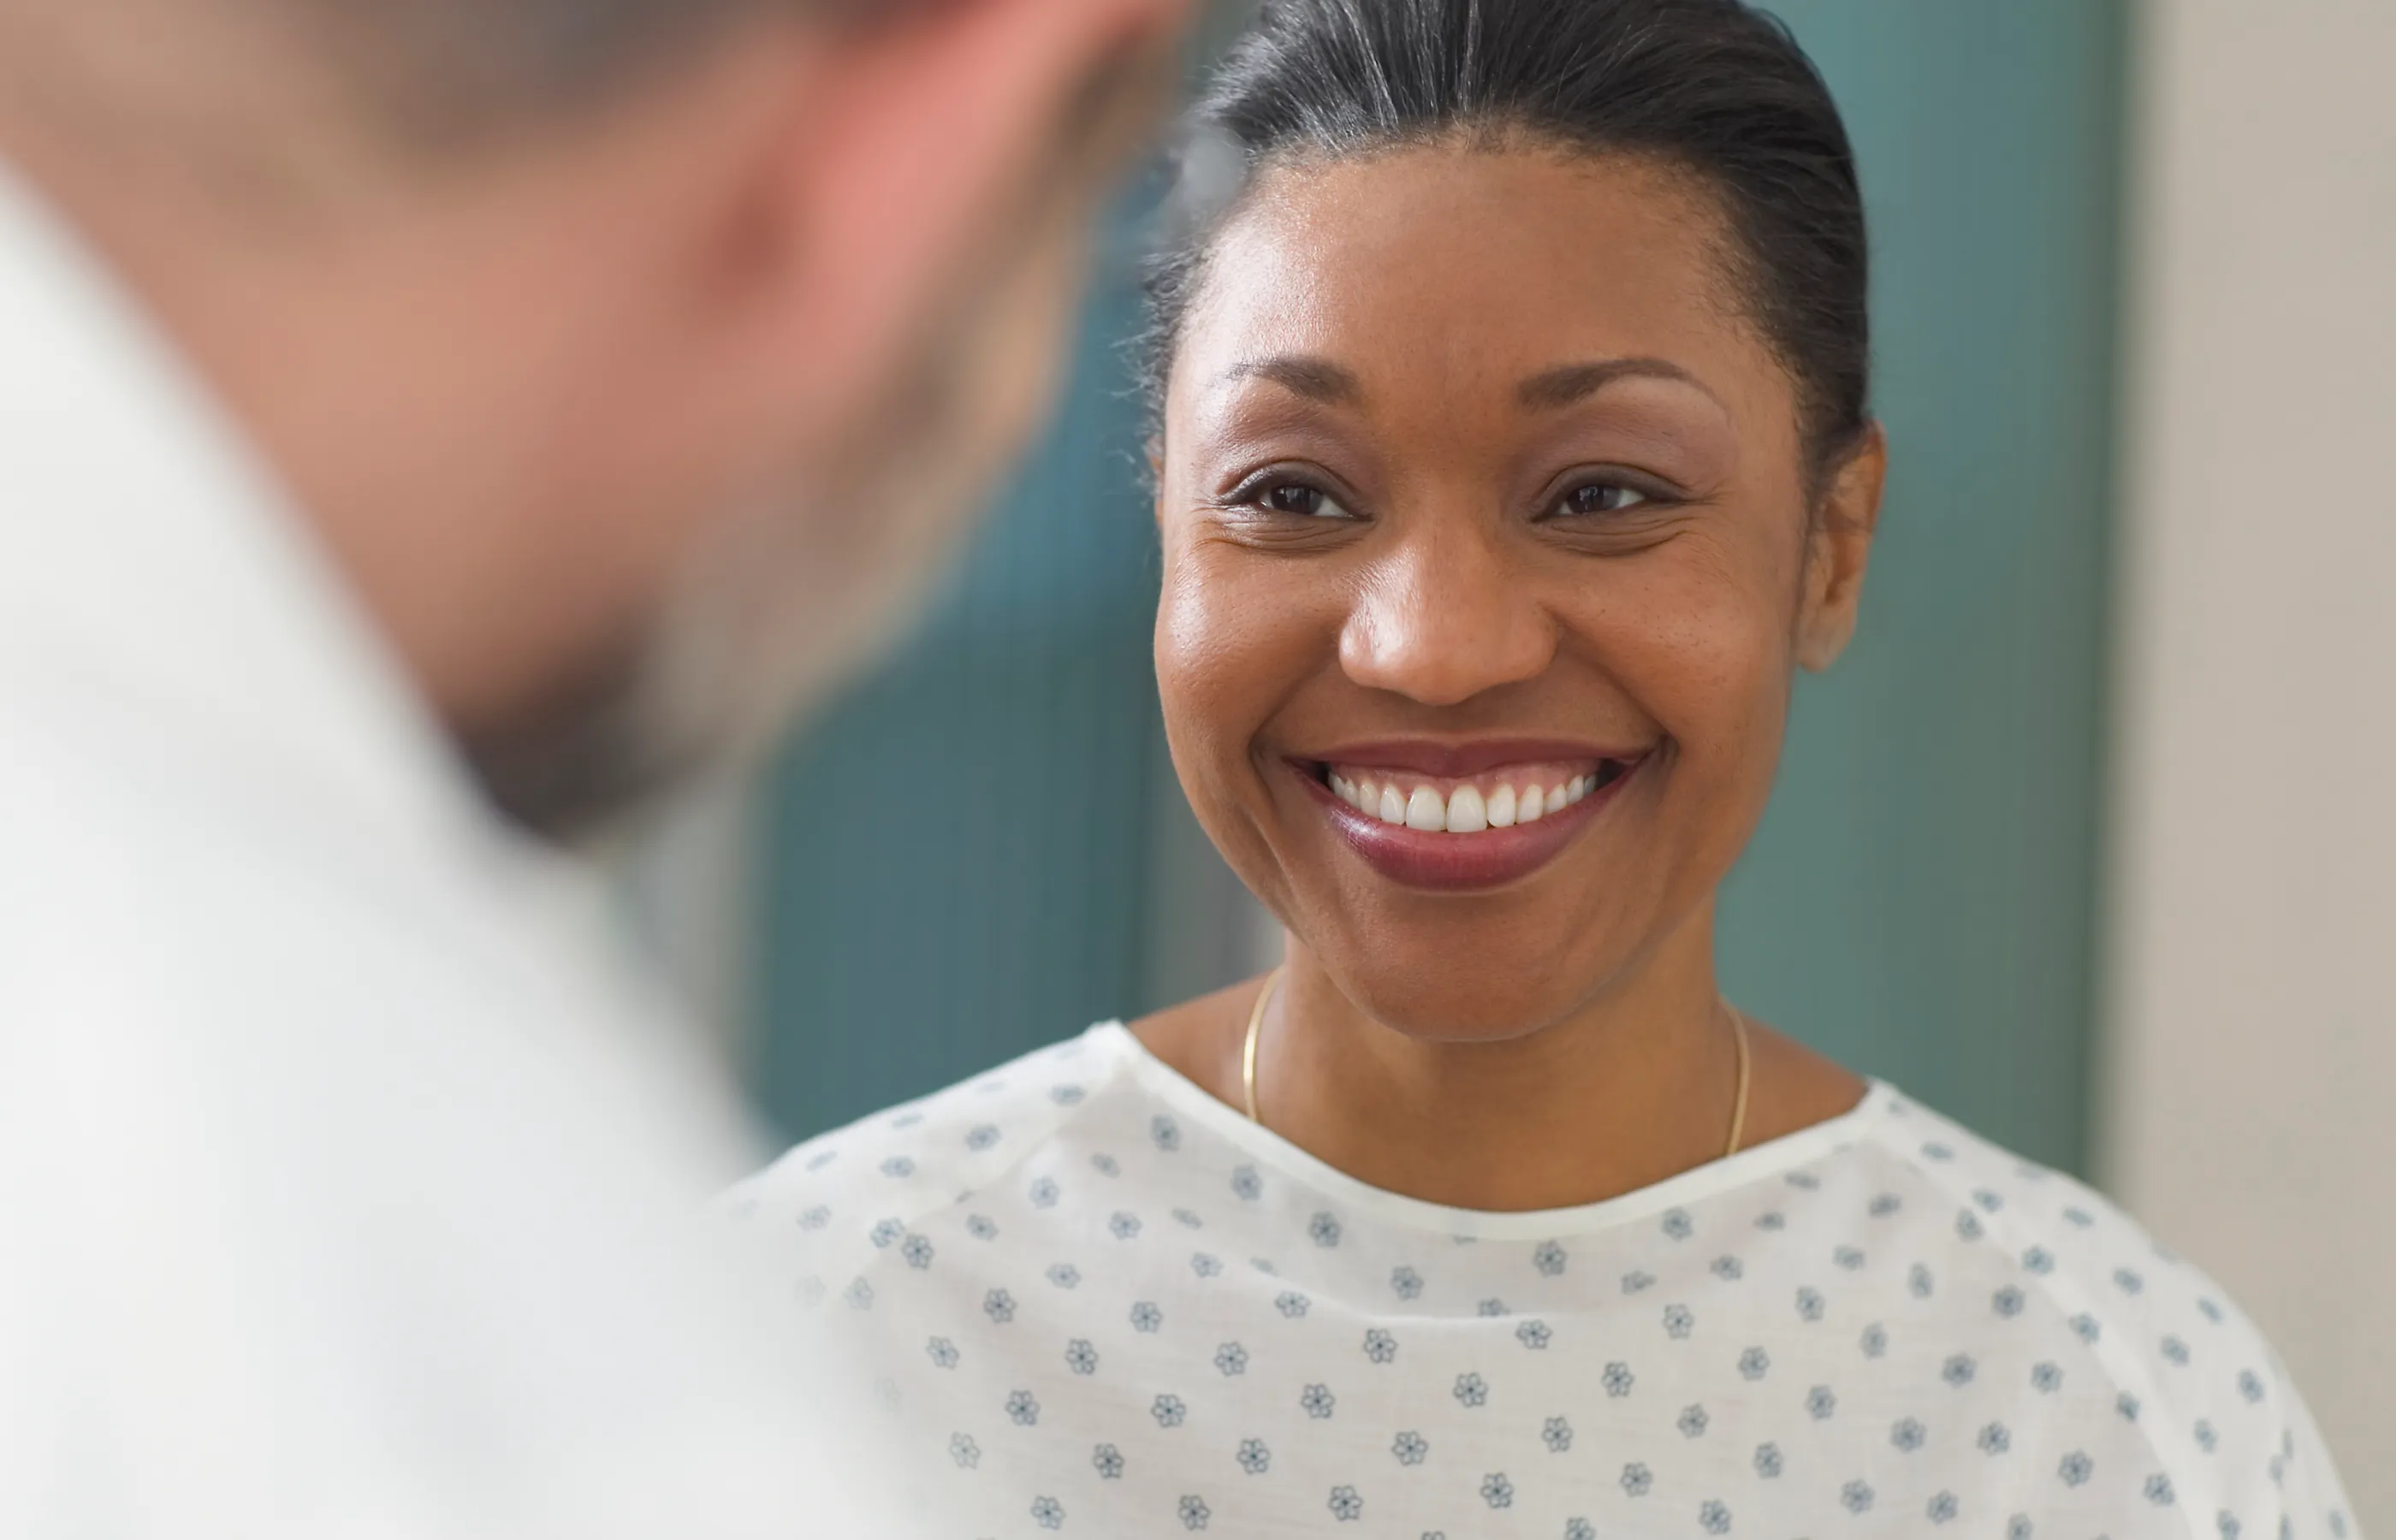 Smiling patient in a gown with a physician